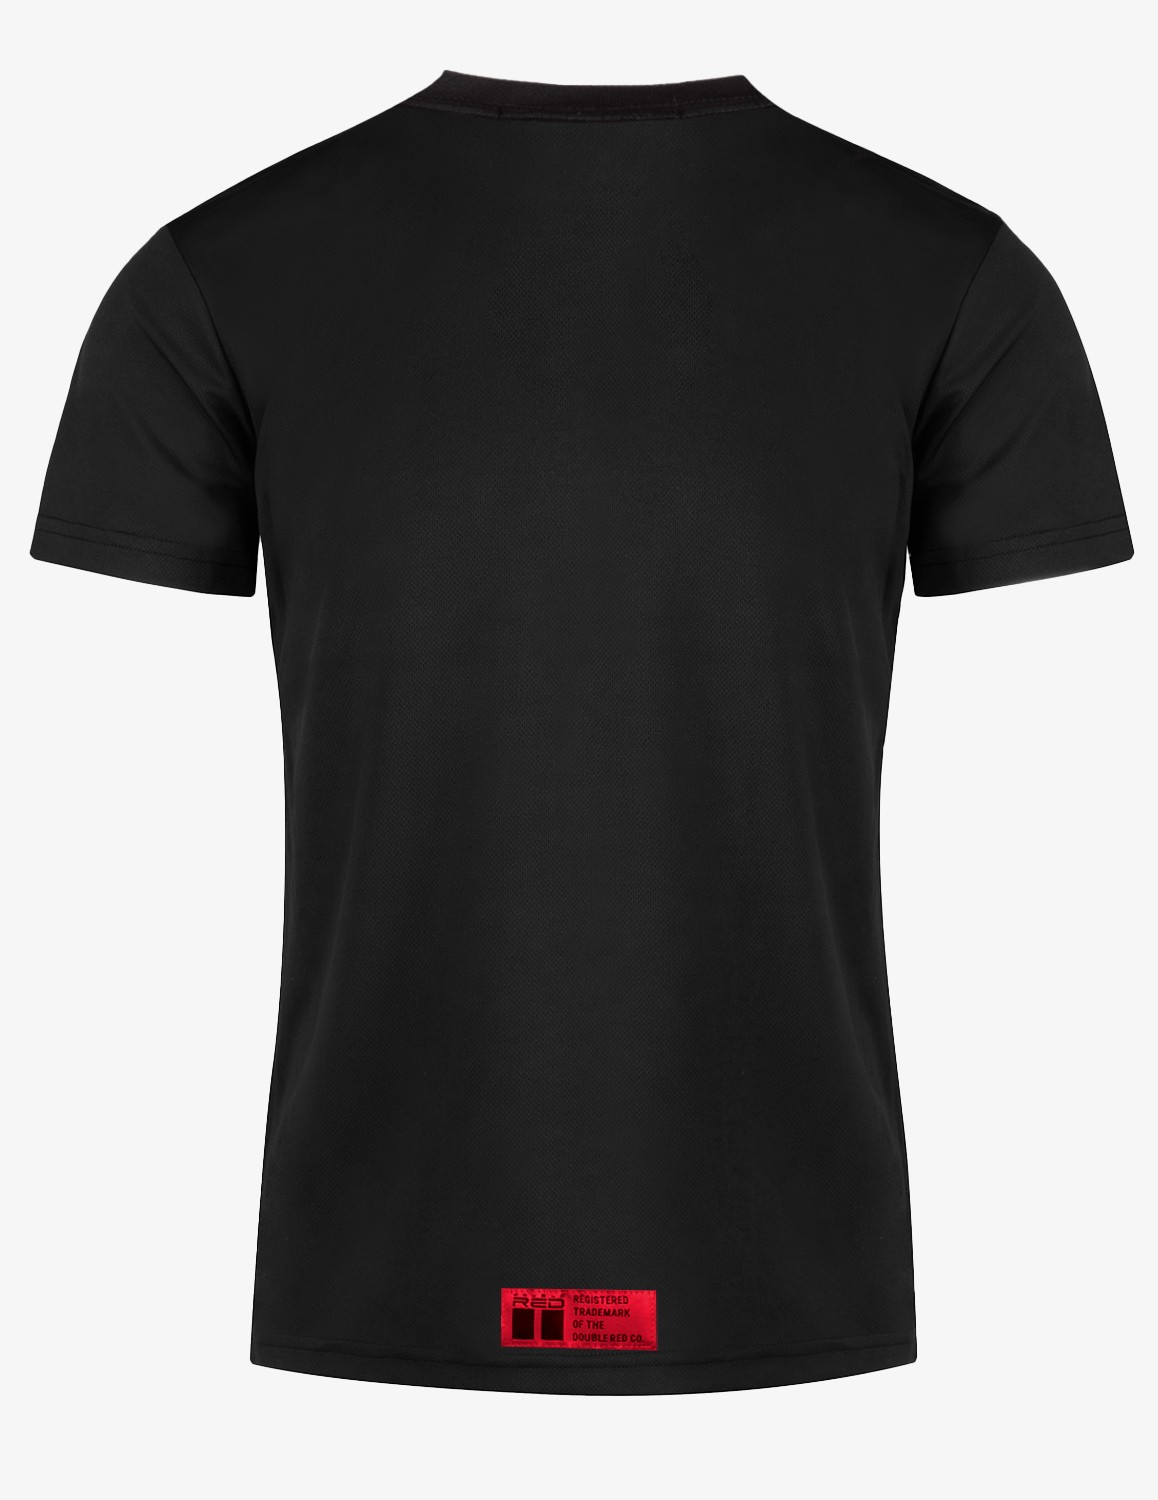 T-shirt SPORT IS YOUR GANG™ FIT+ Black